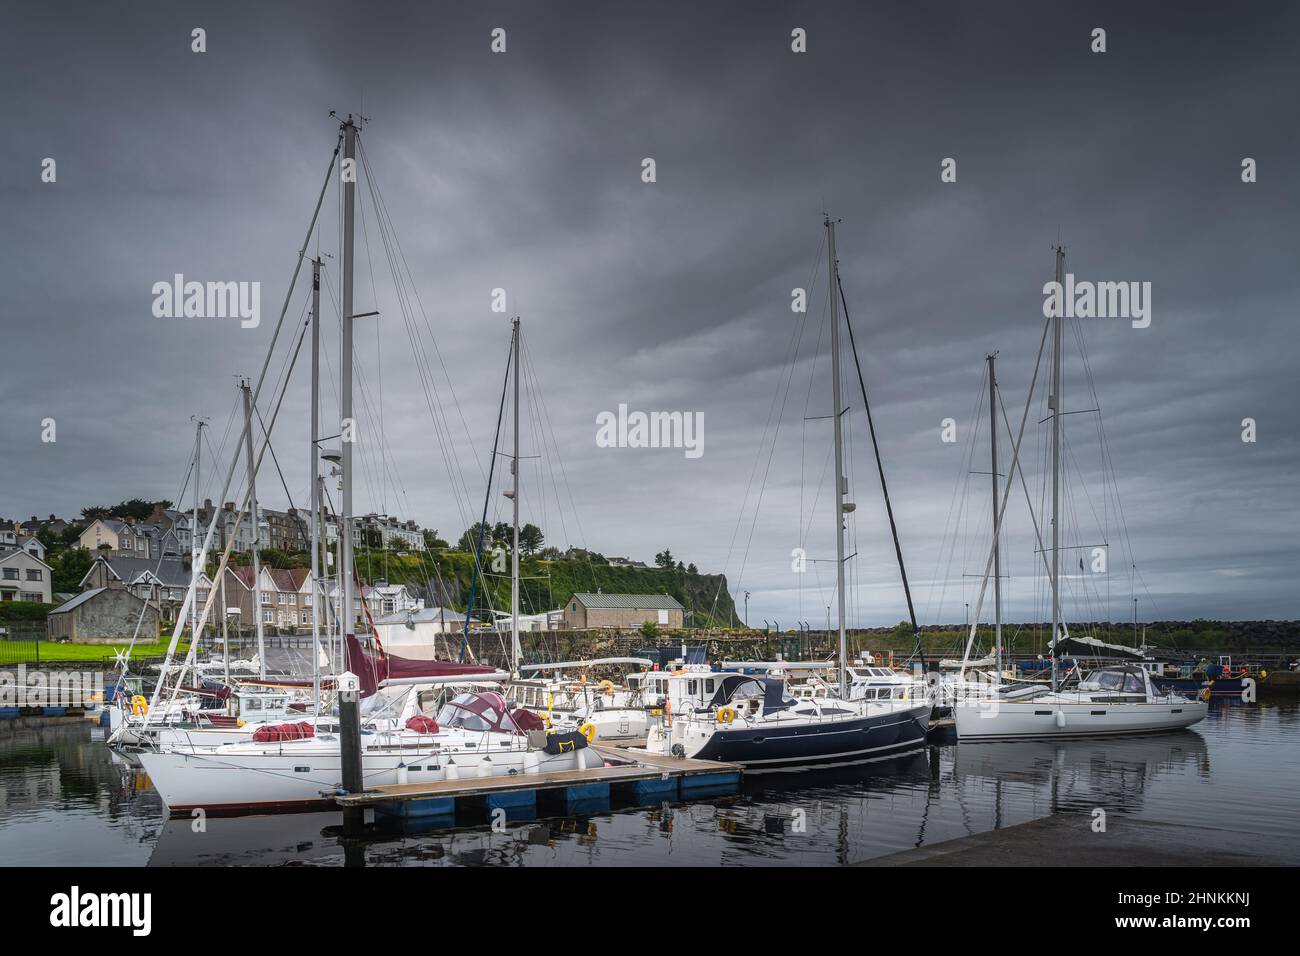 Yachts and sailboats moored in small, beautiful marina in Ballycastle town Stock Photo